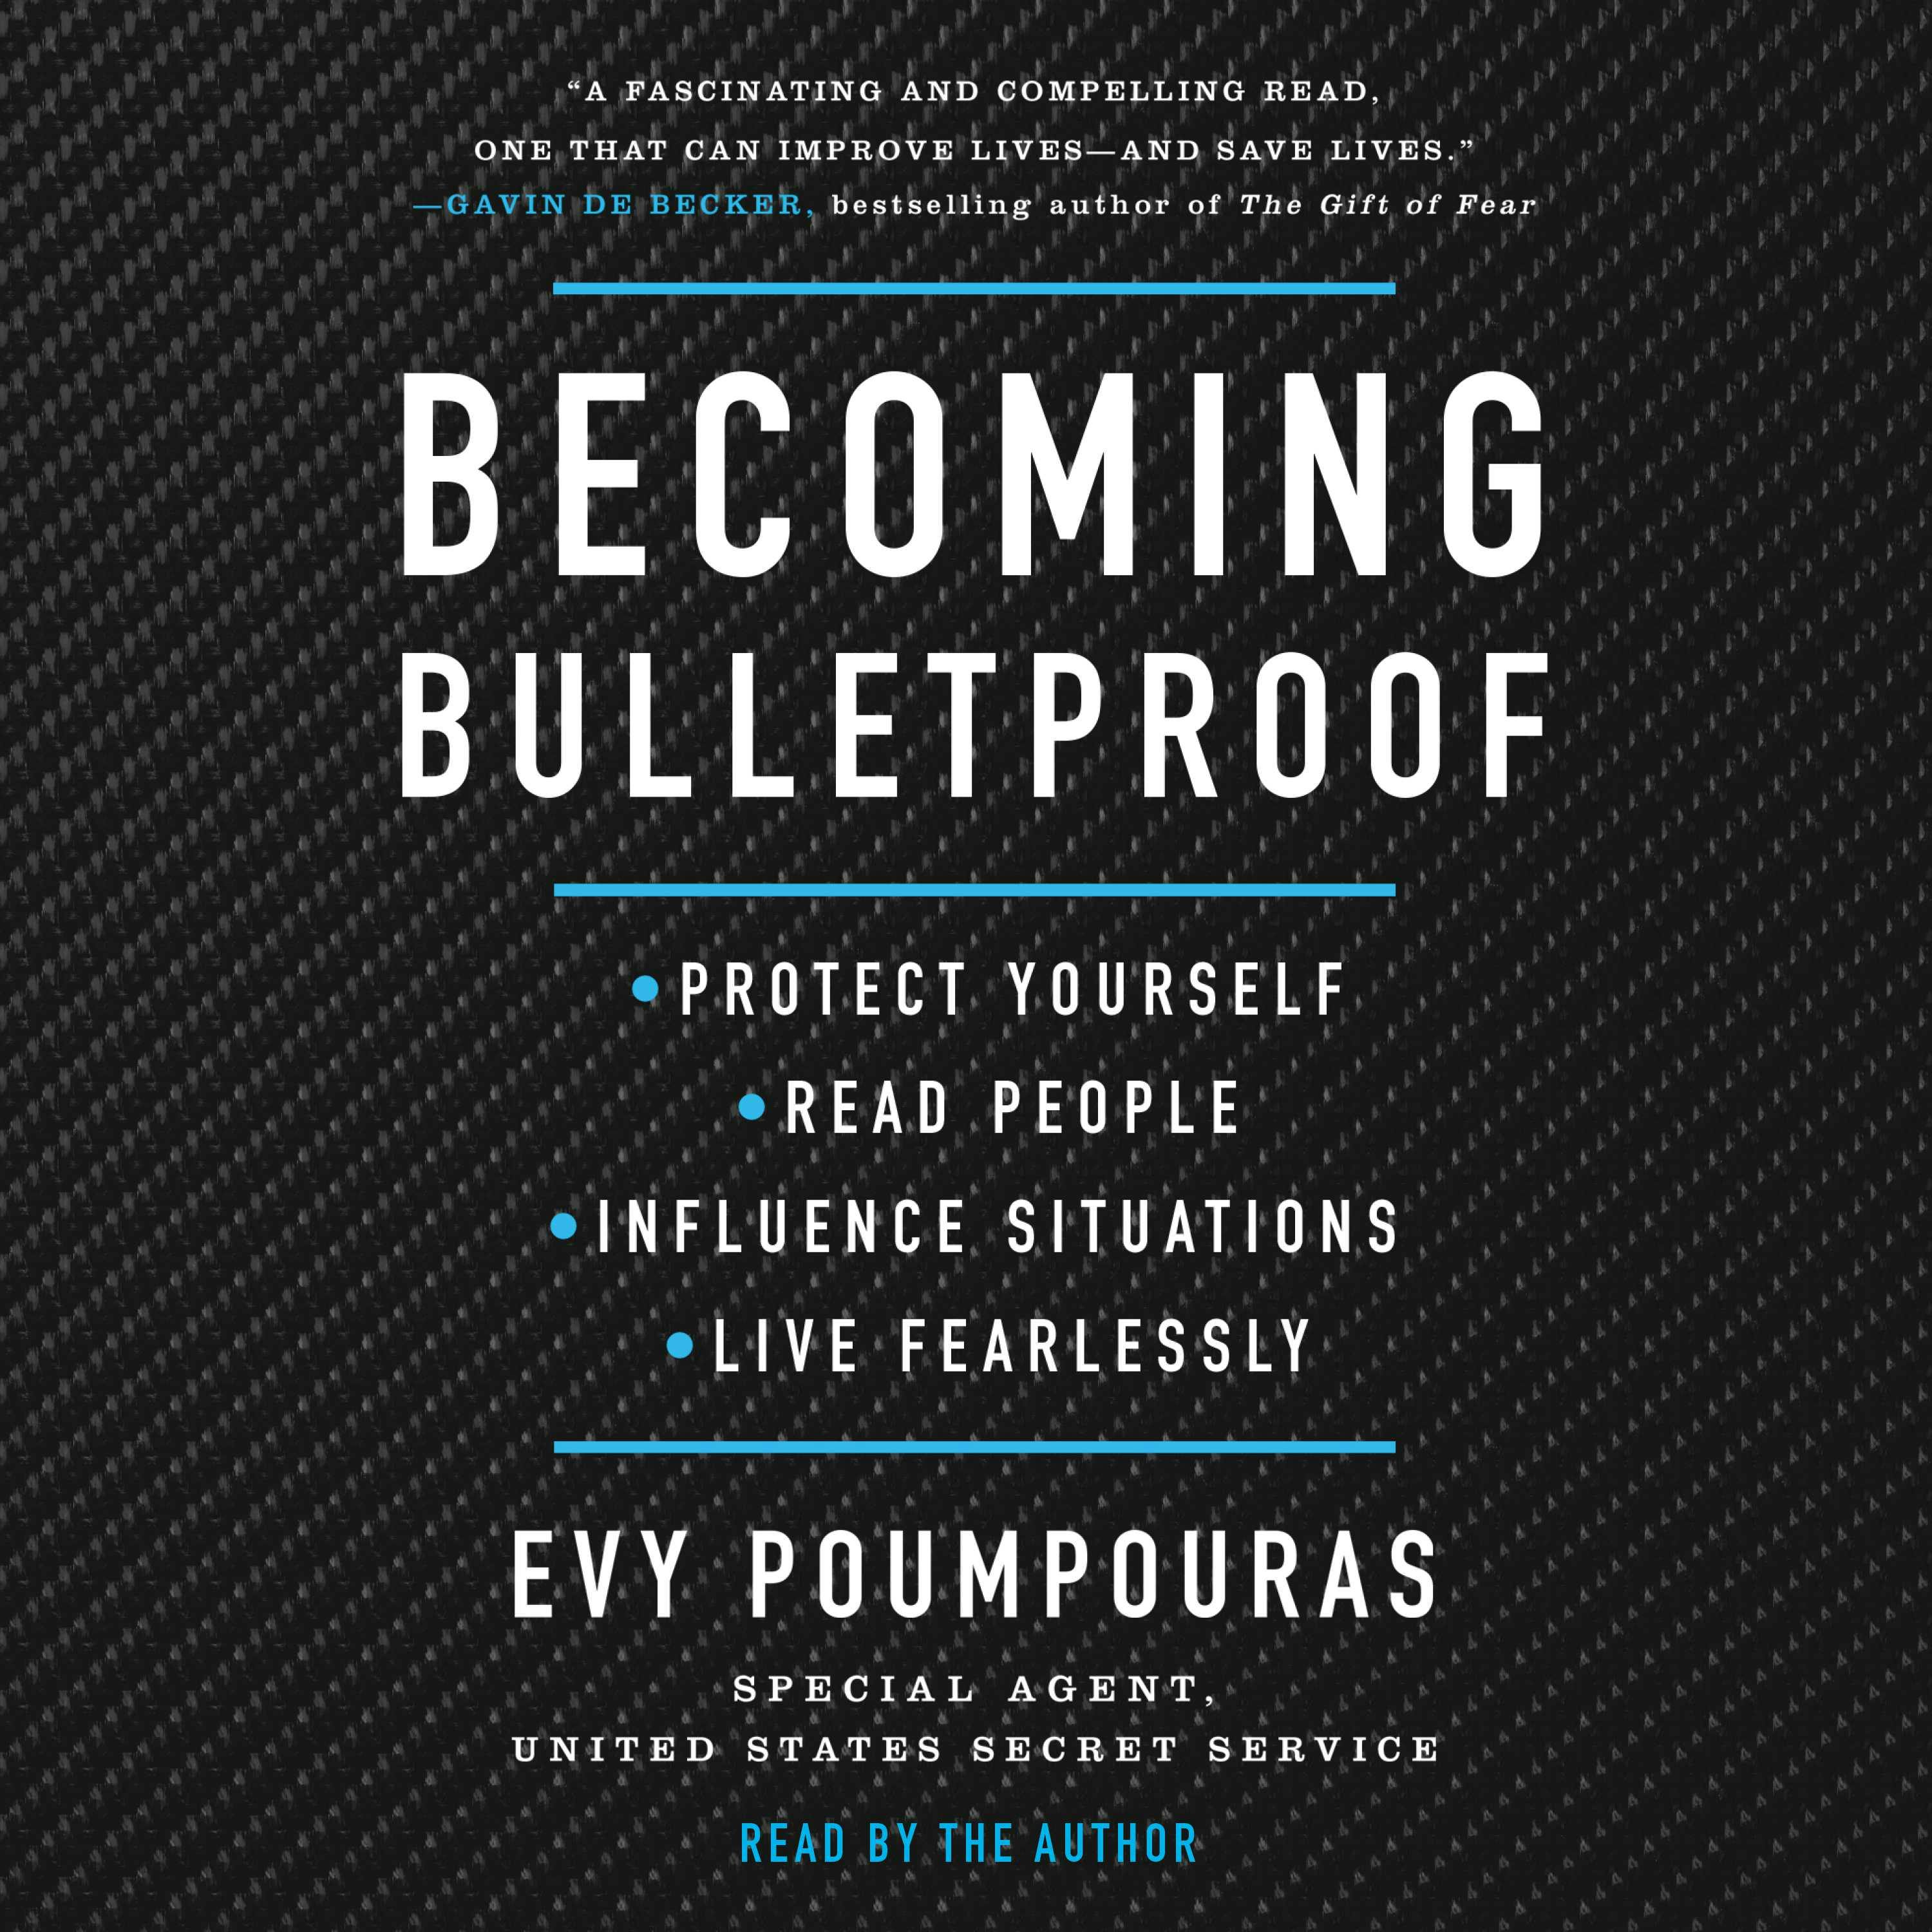 Becoming Bulletproof: Protect Yourself, Read People, Influence Situations, and Live Fearlessly - Evy Poumpouras